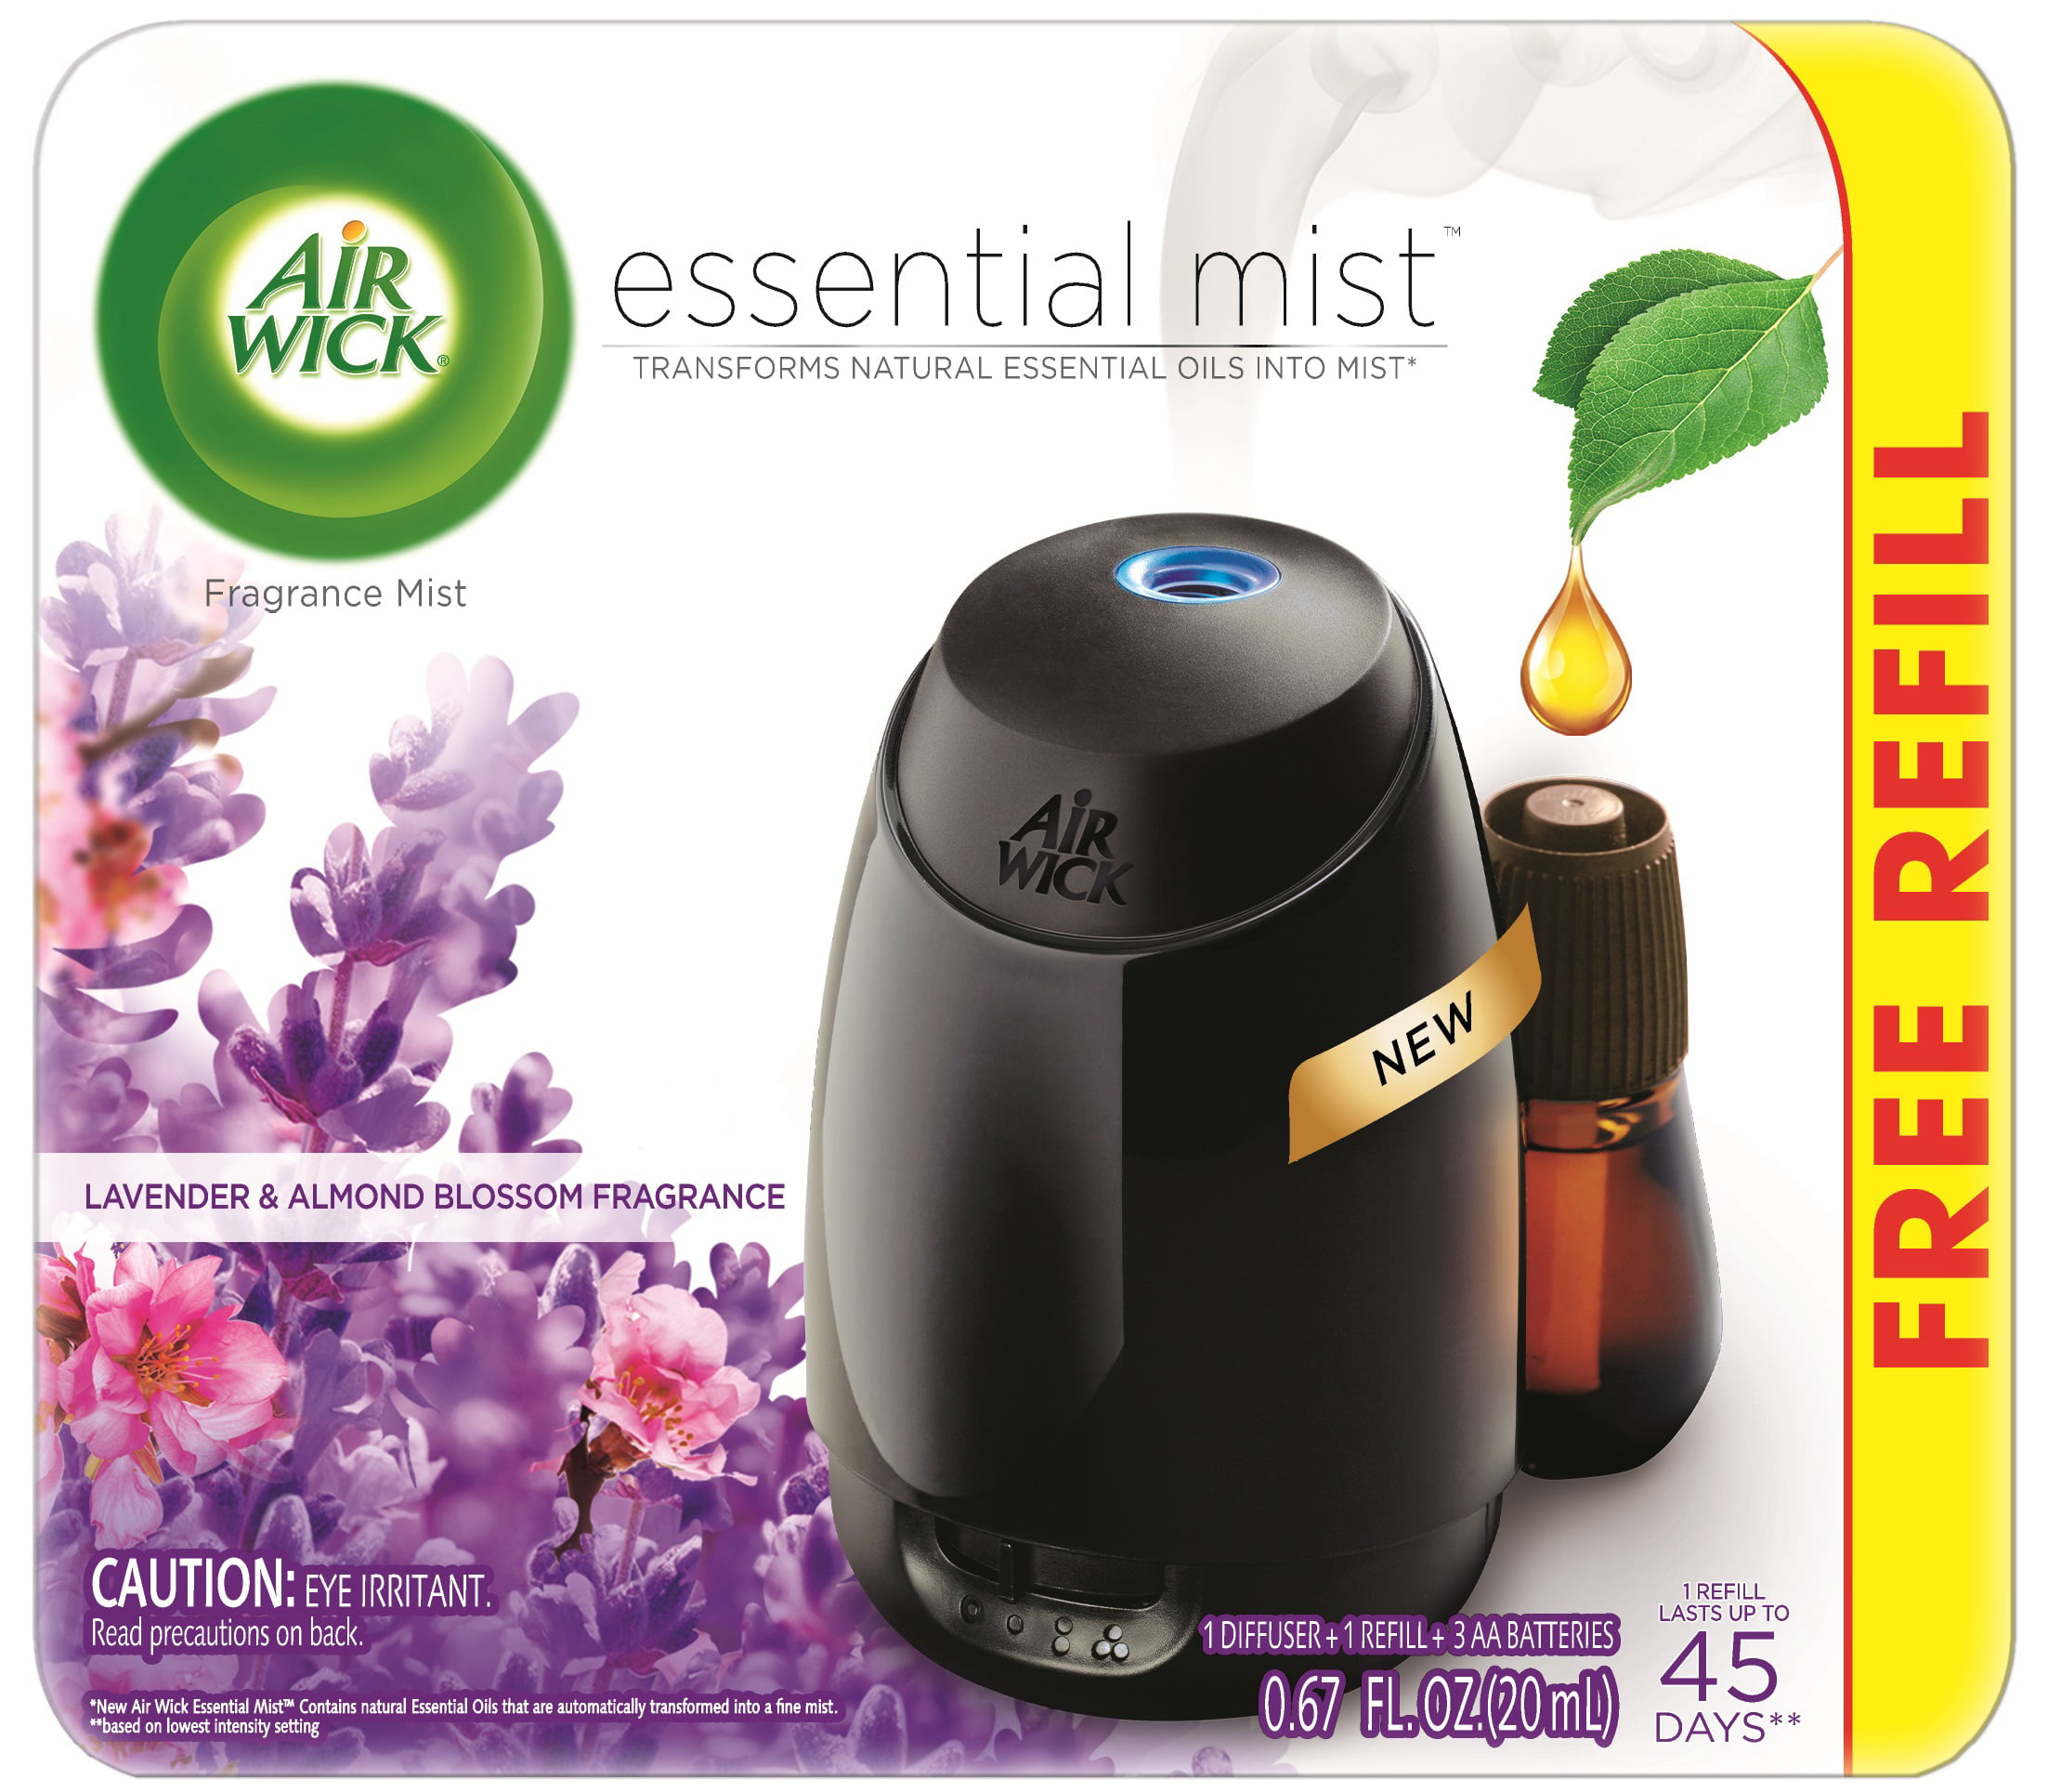 Air Wick Essential Mist Starter Kit (Diffuser + Refill), Lavender and